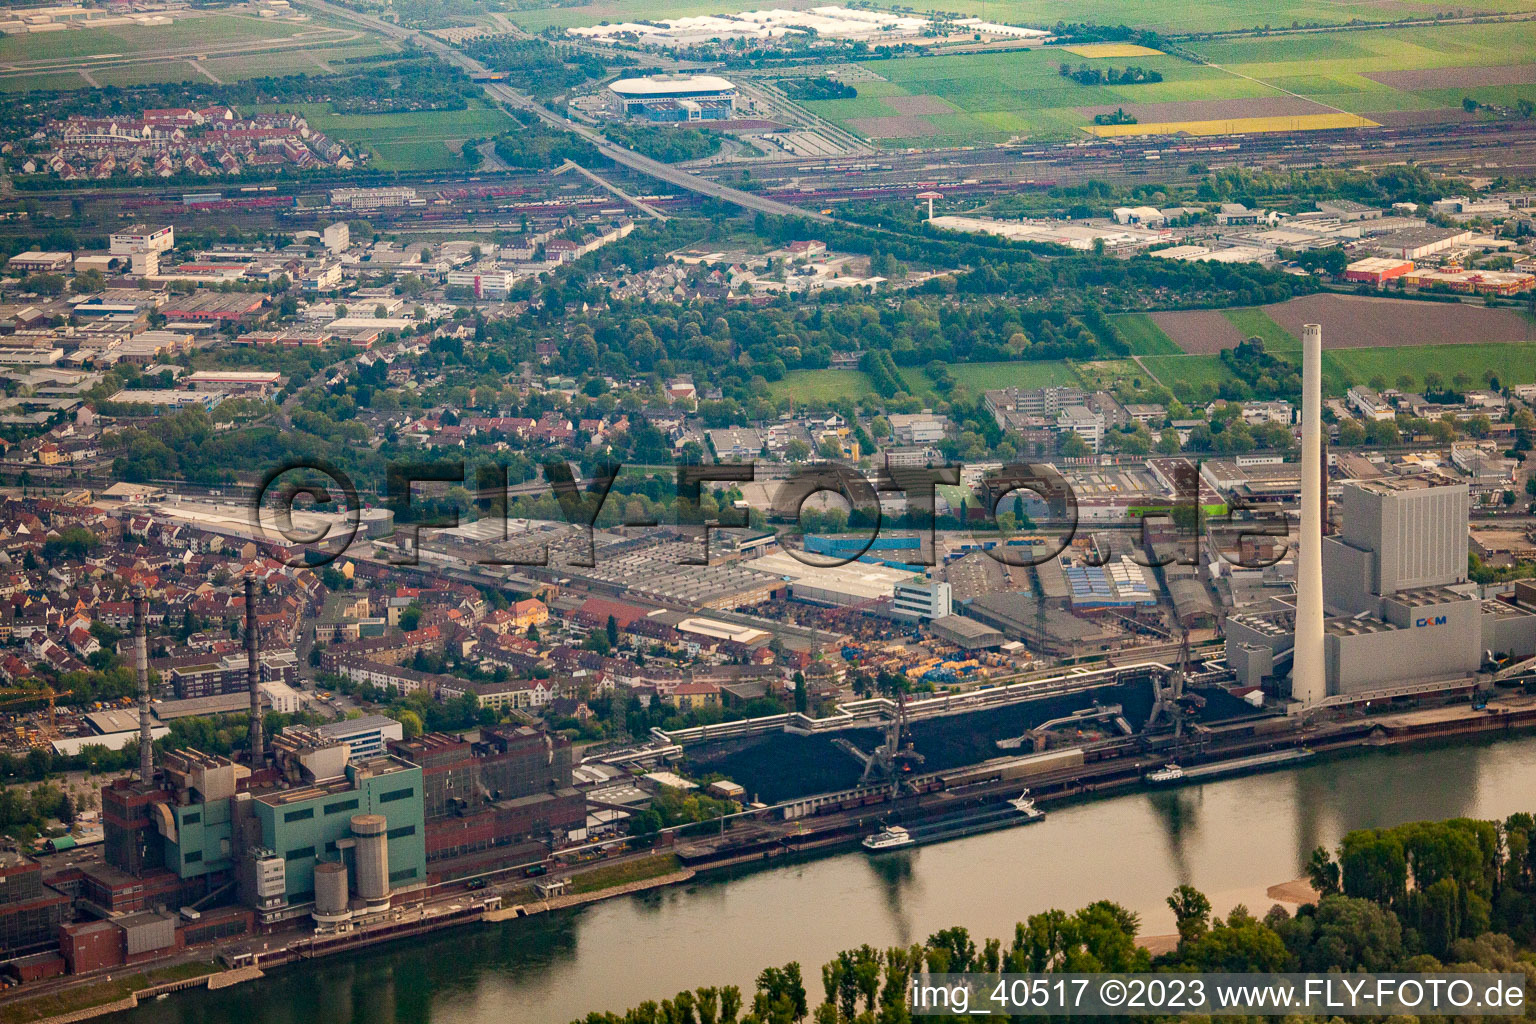 GKM in the district Neckarau in Mannheim in the state Baden-Wuerttemberg, Germany from above